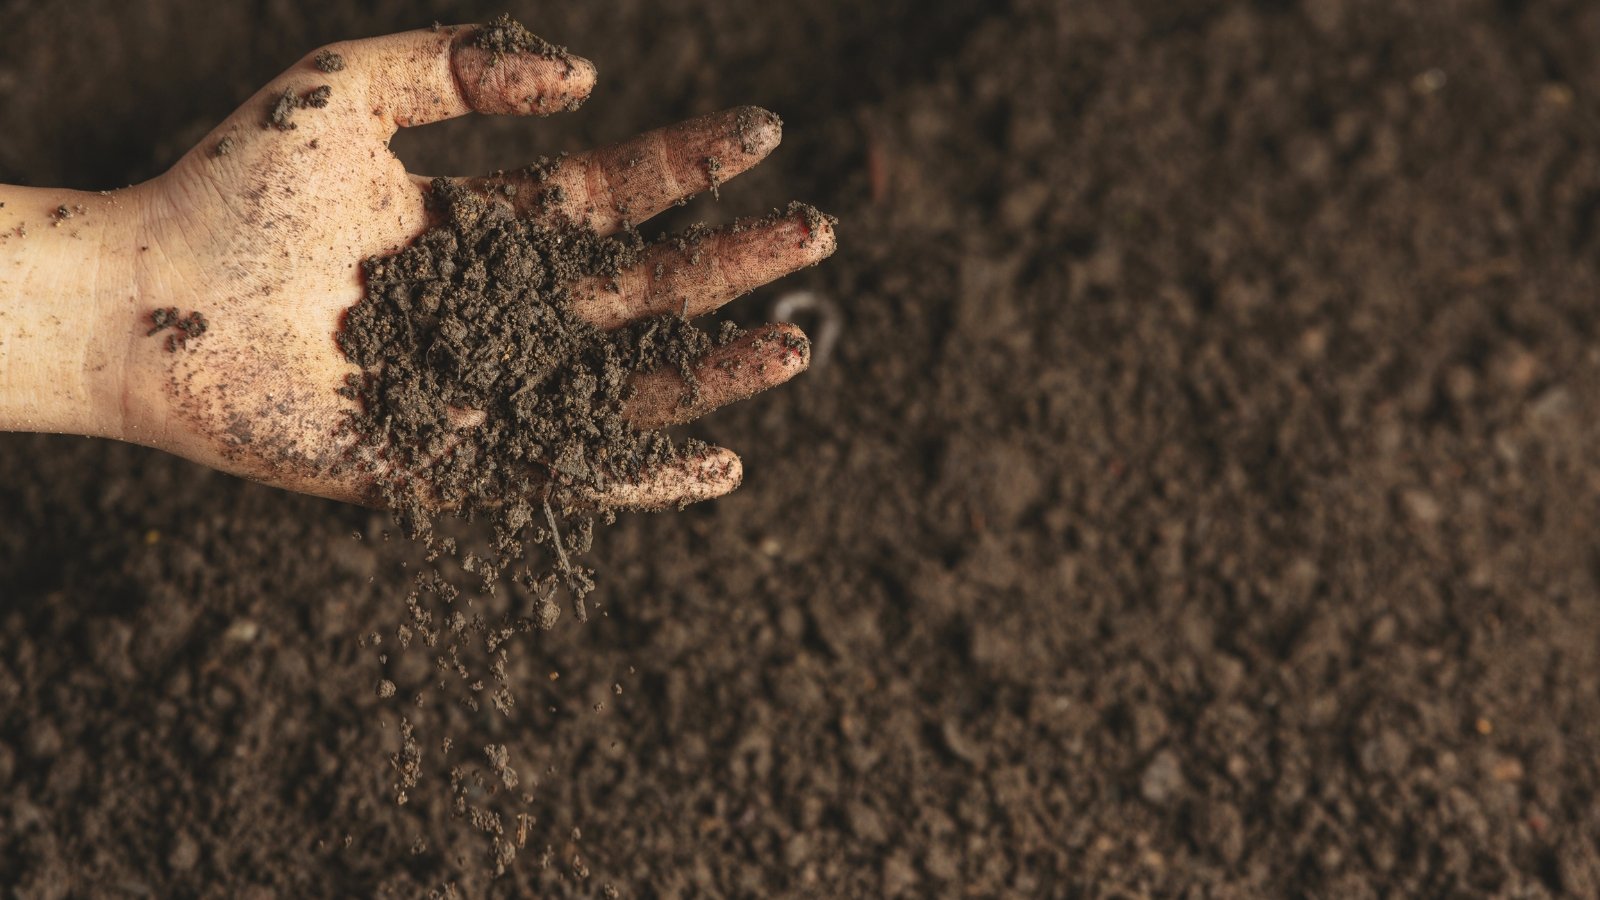 Close-up of a hand pouring healthy soil through its fingers against the background of soil in the garden.